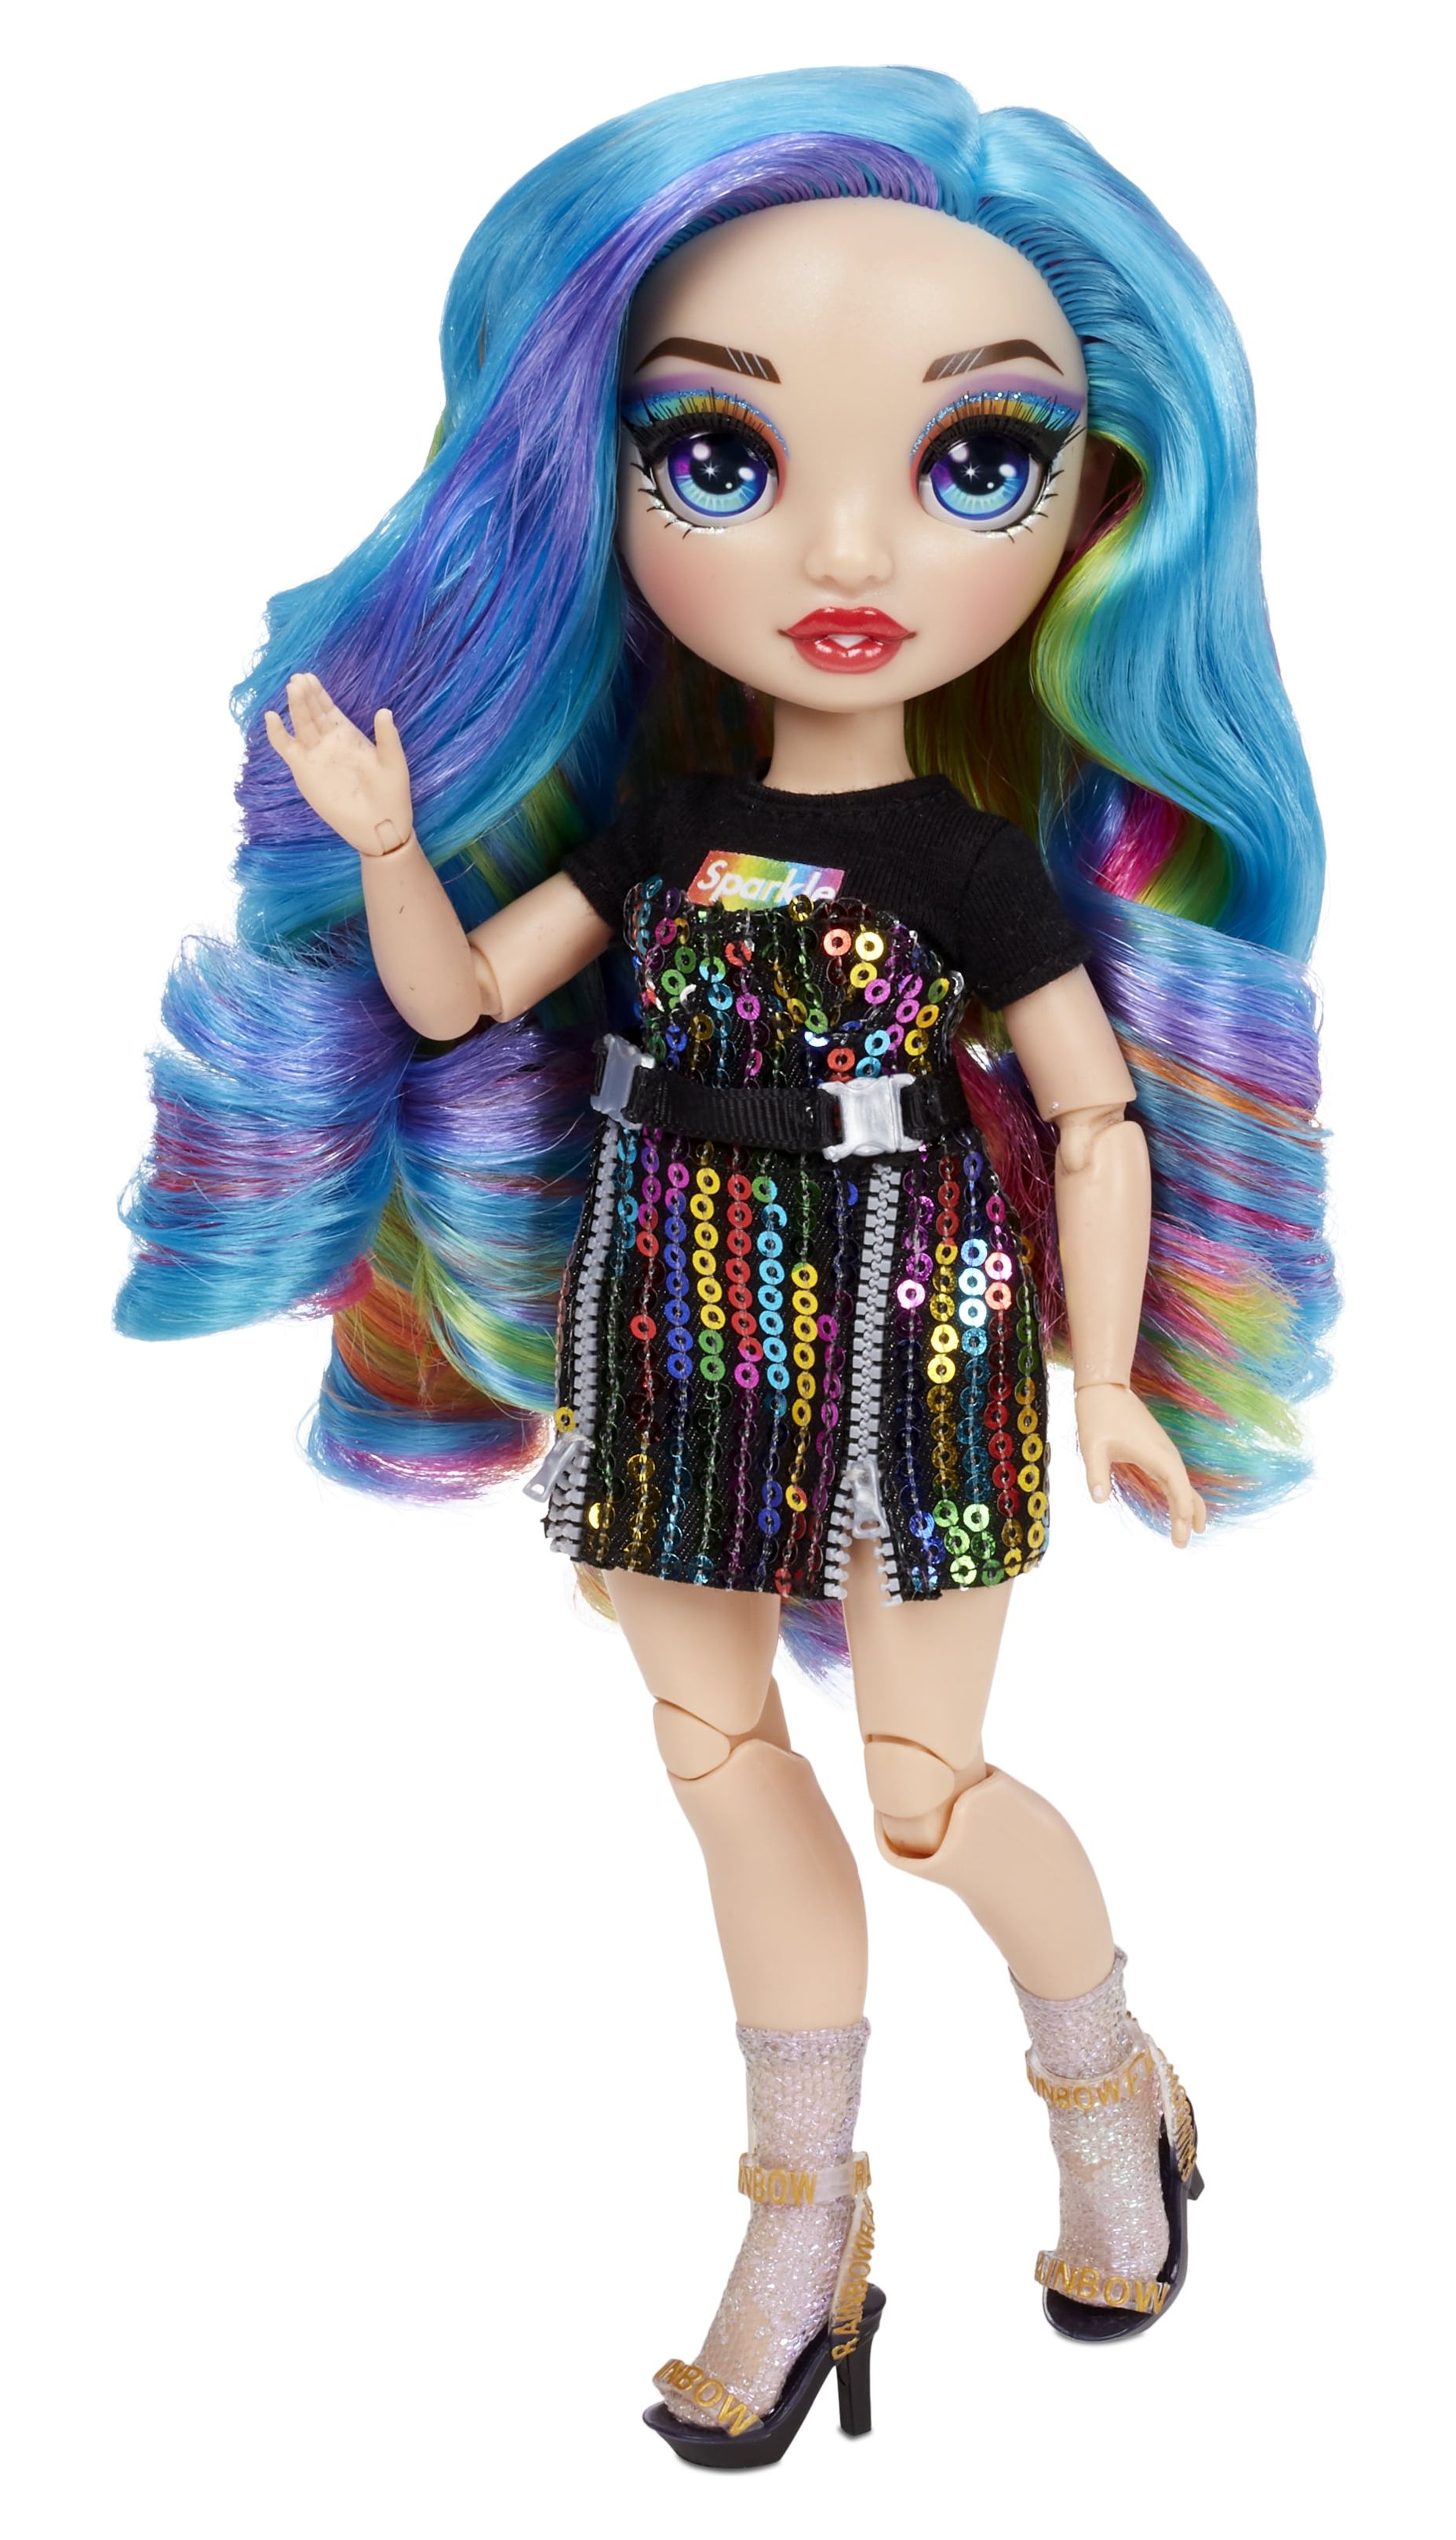 Rainbow High Amaya Raine – Rainbow Fashion Doll with 2 Complete Mix & Match Outfits and Accessories, Toys for Kids 6-12 Years Old - image 1 of 8